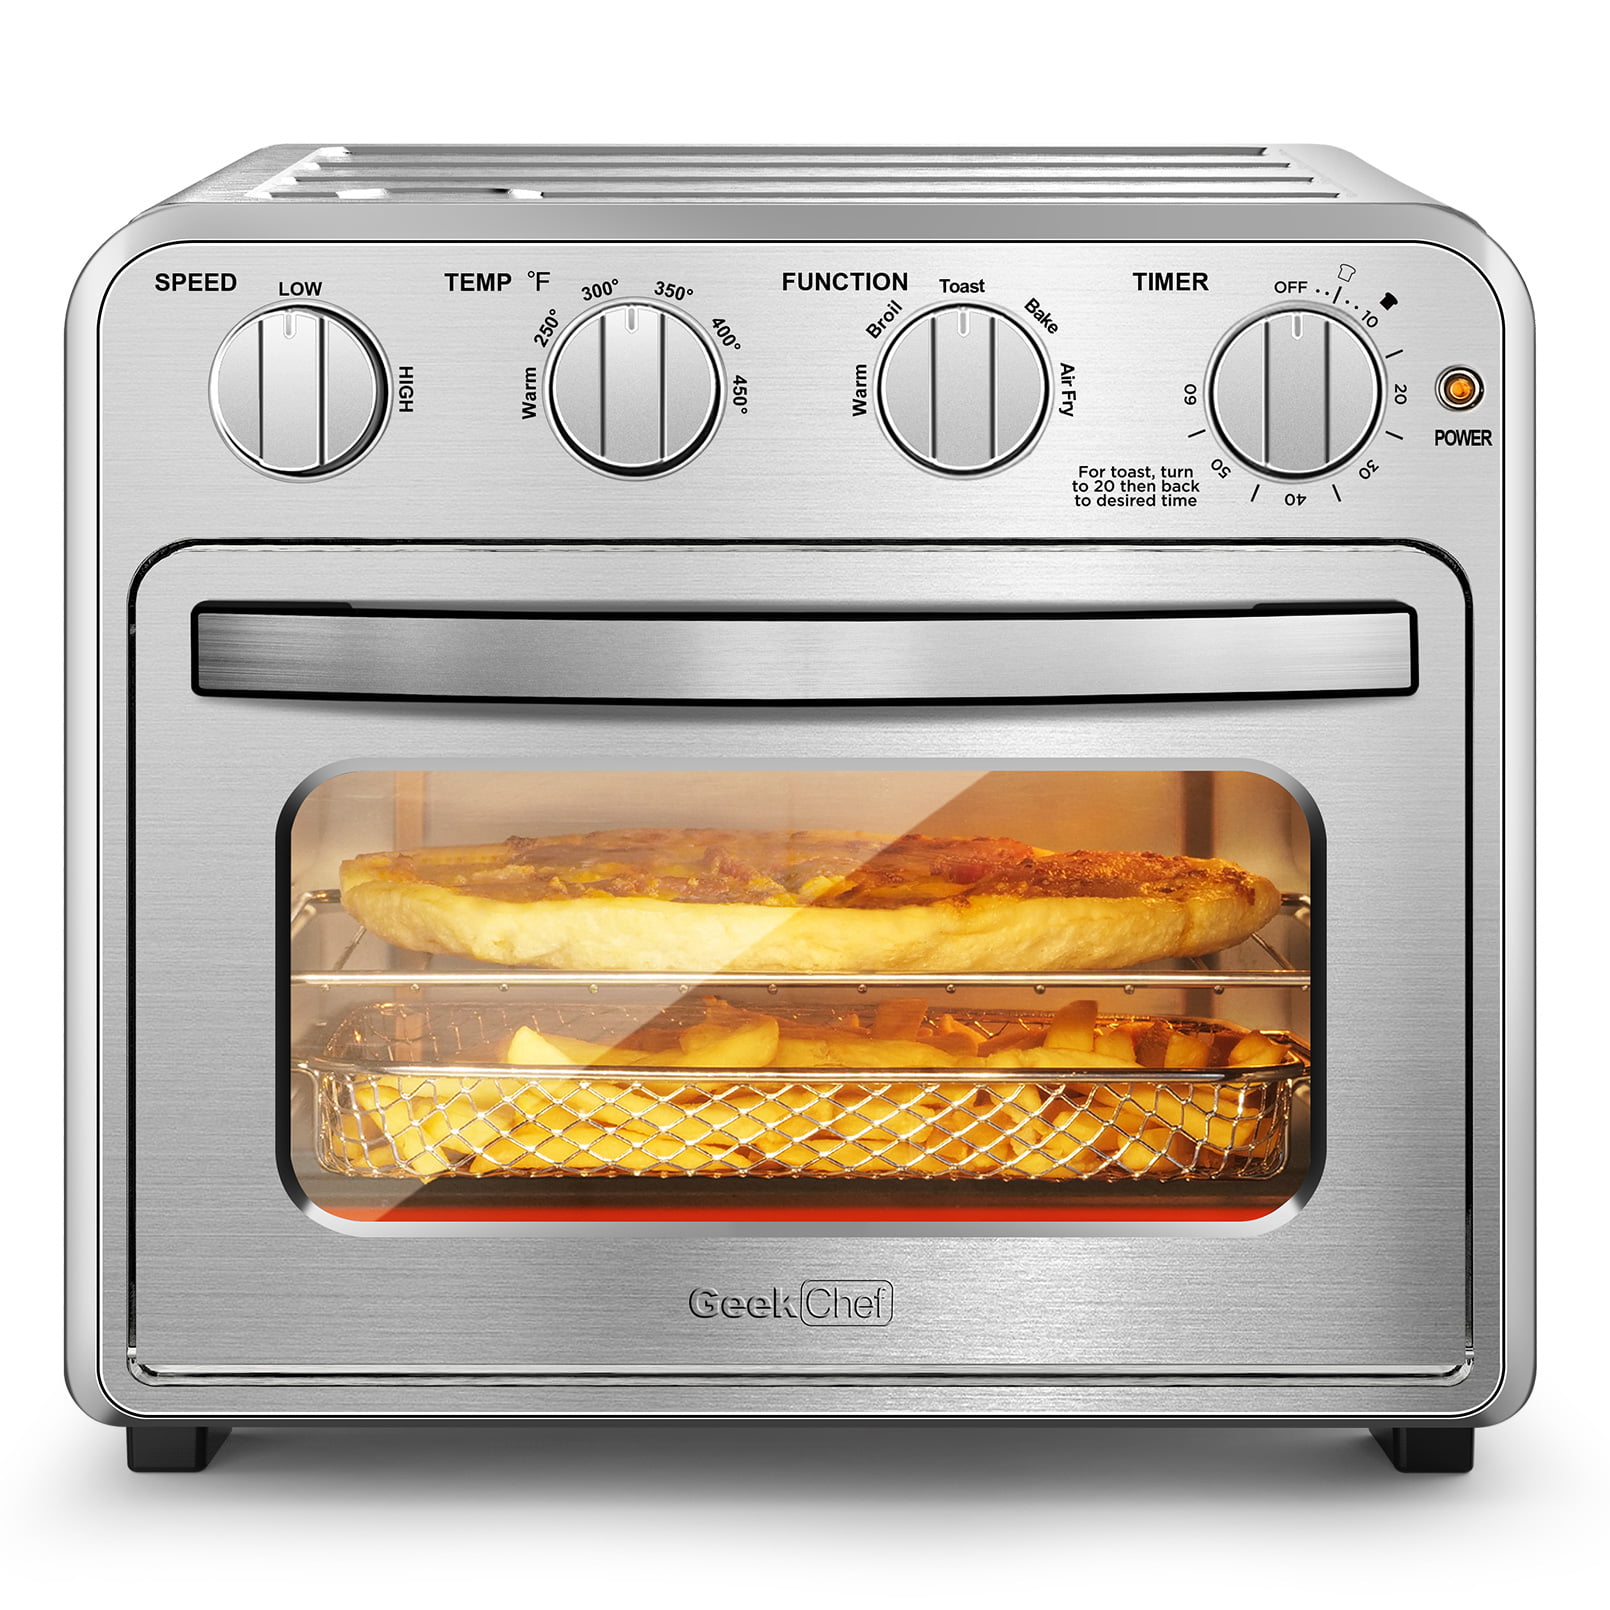 Dropship Geek Chef AiroCook 31QT Air Fryer Toaster Oven Combo, With Extra Large  Capacity, Family Size, 18-in-1 Countertop Oven--YS to Sell Online at a  Lower Price